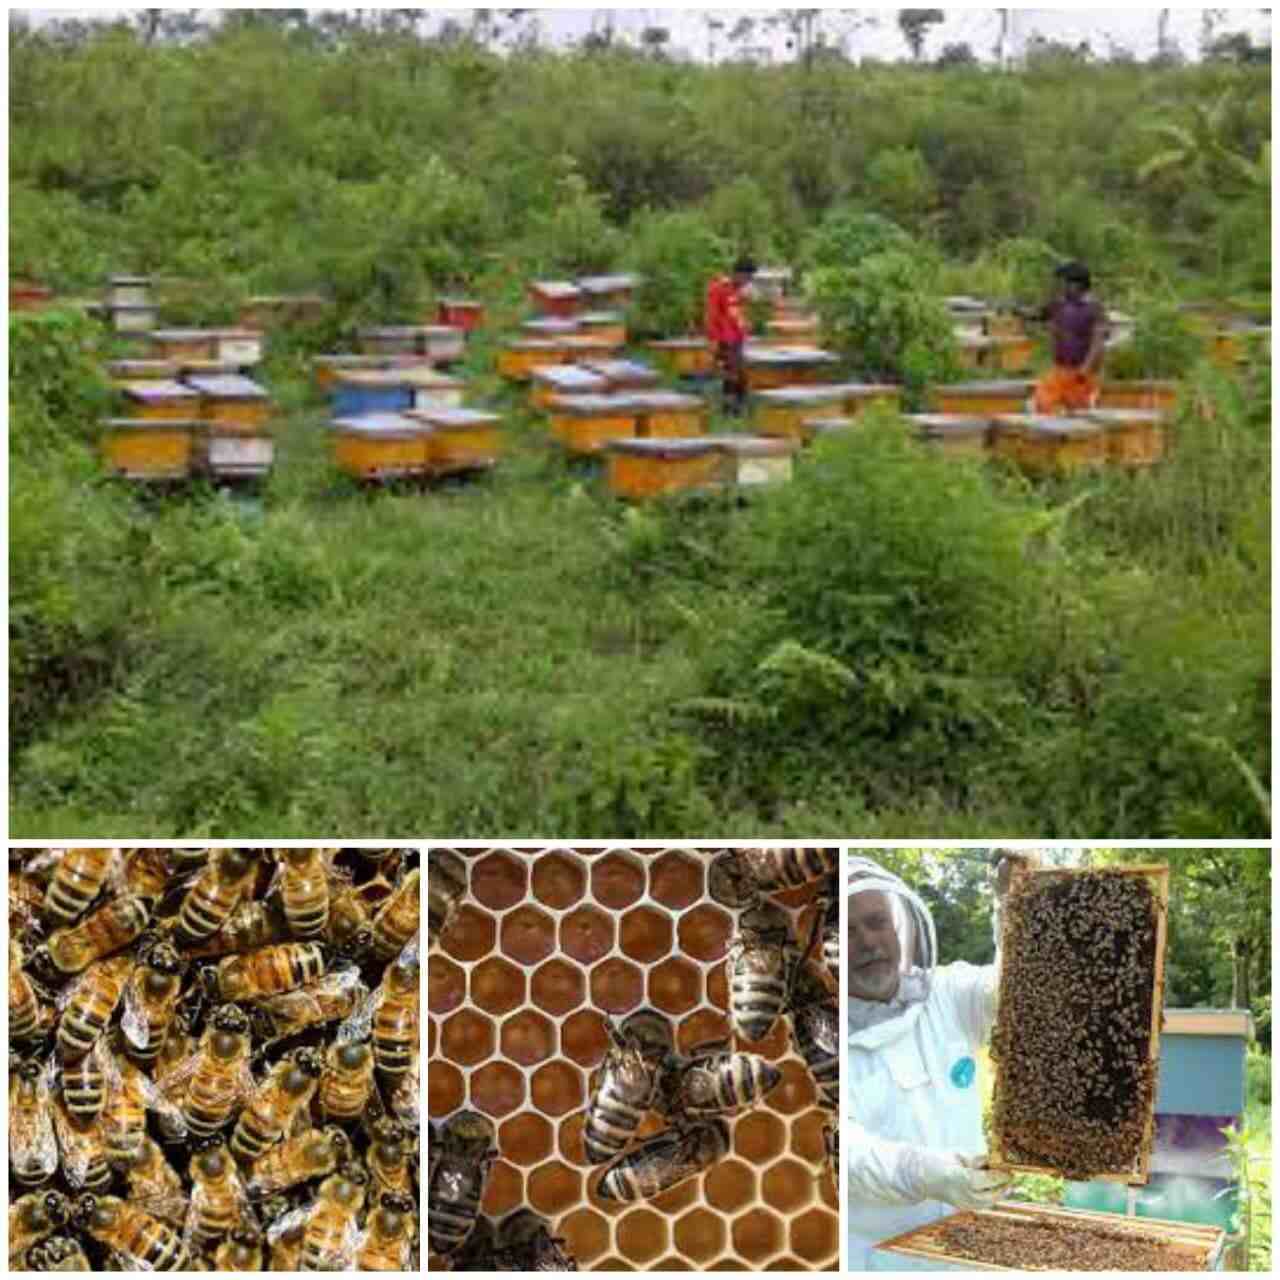 Bee keeping and Honey Processing business